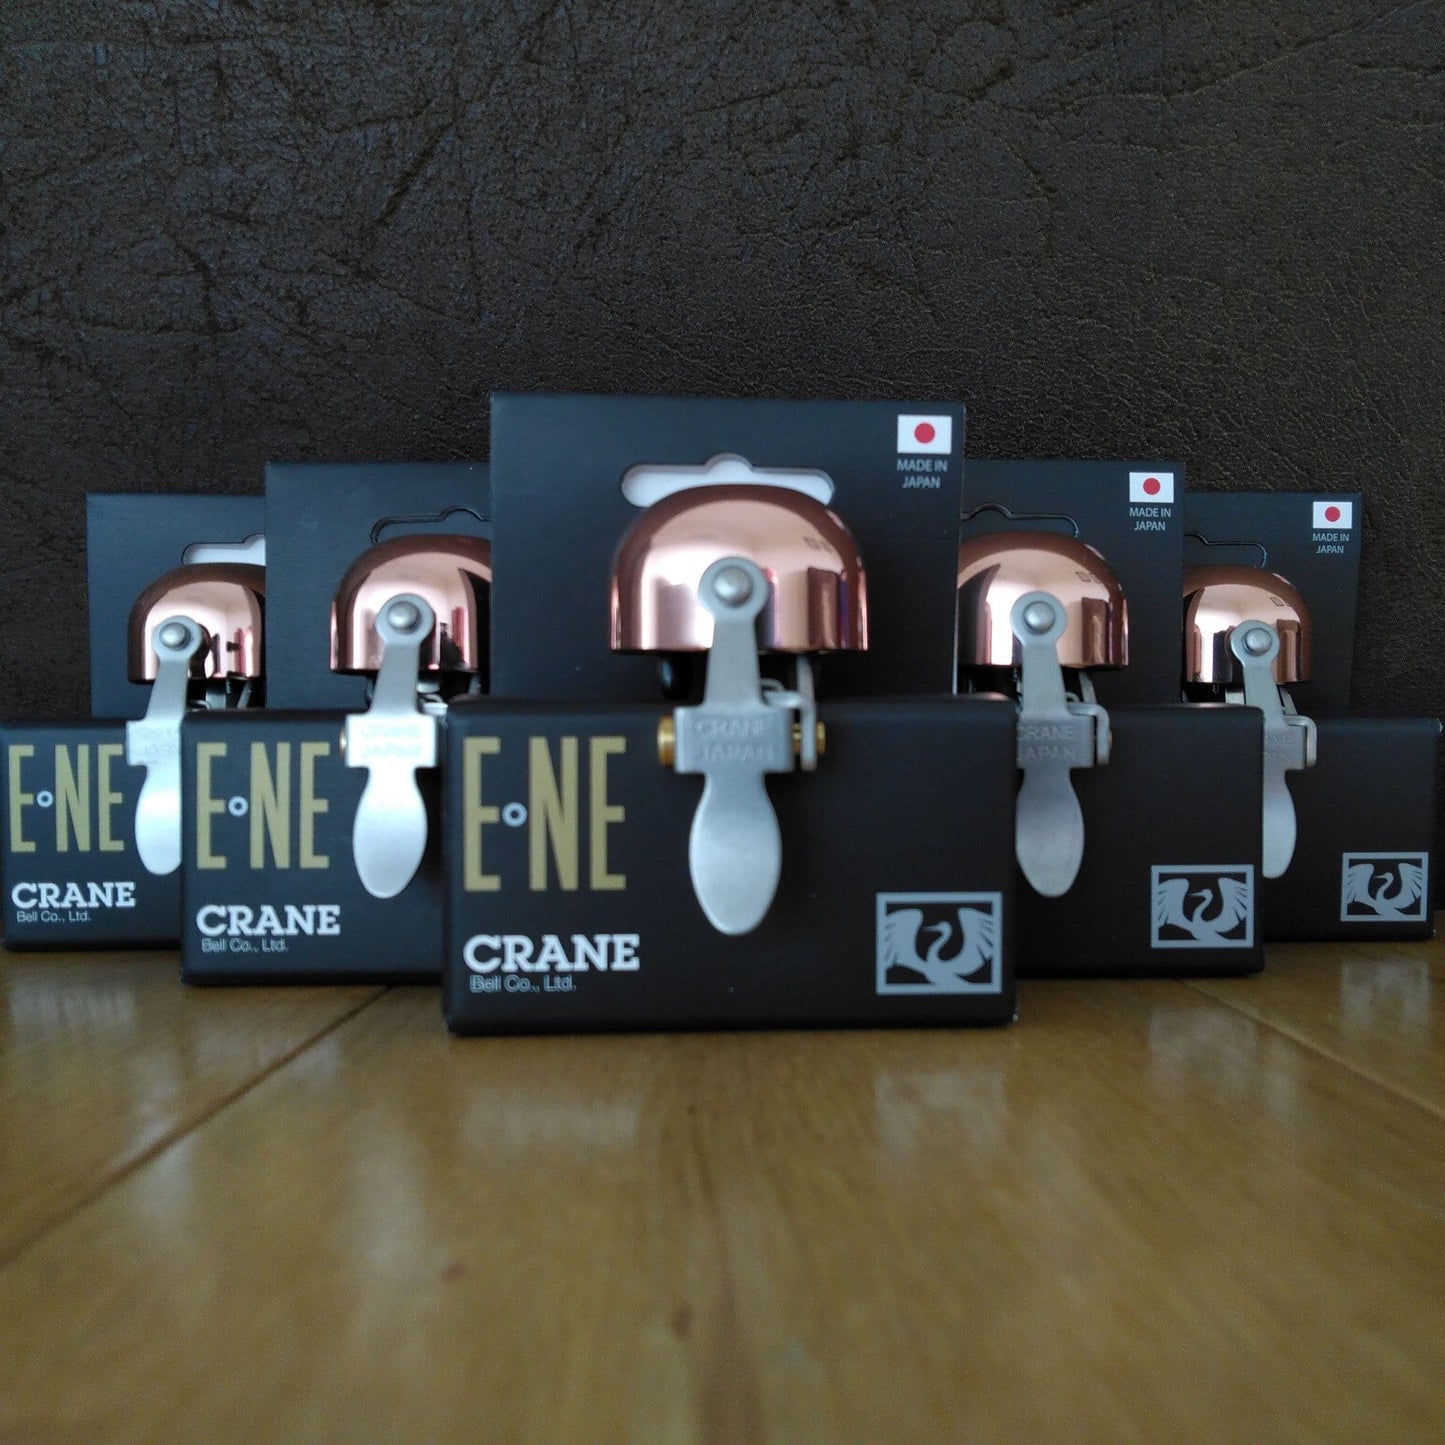 Collection of Copper Crane E-NE bicycle Bells in retail boxes